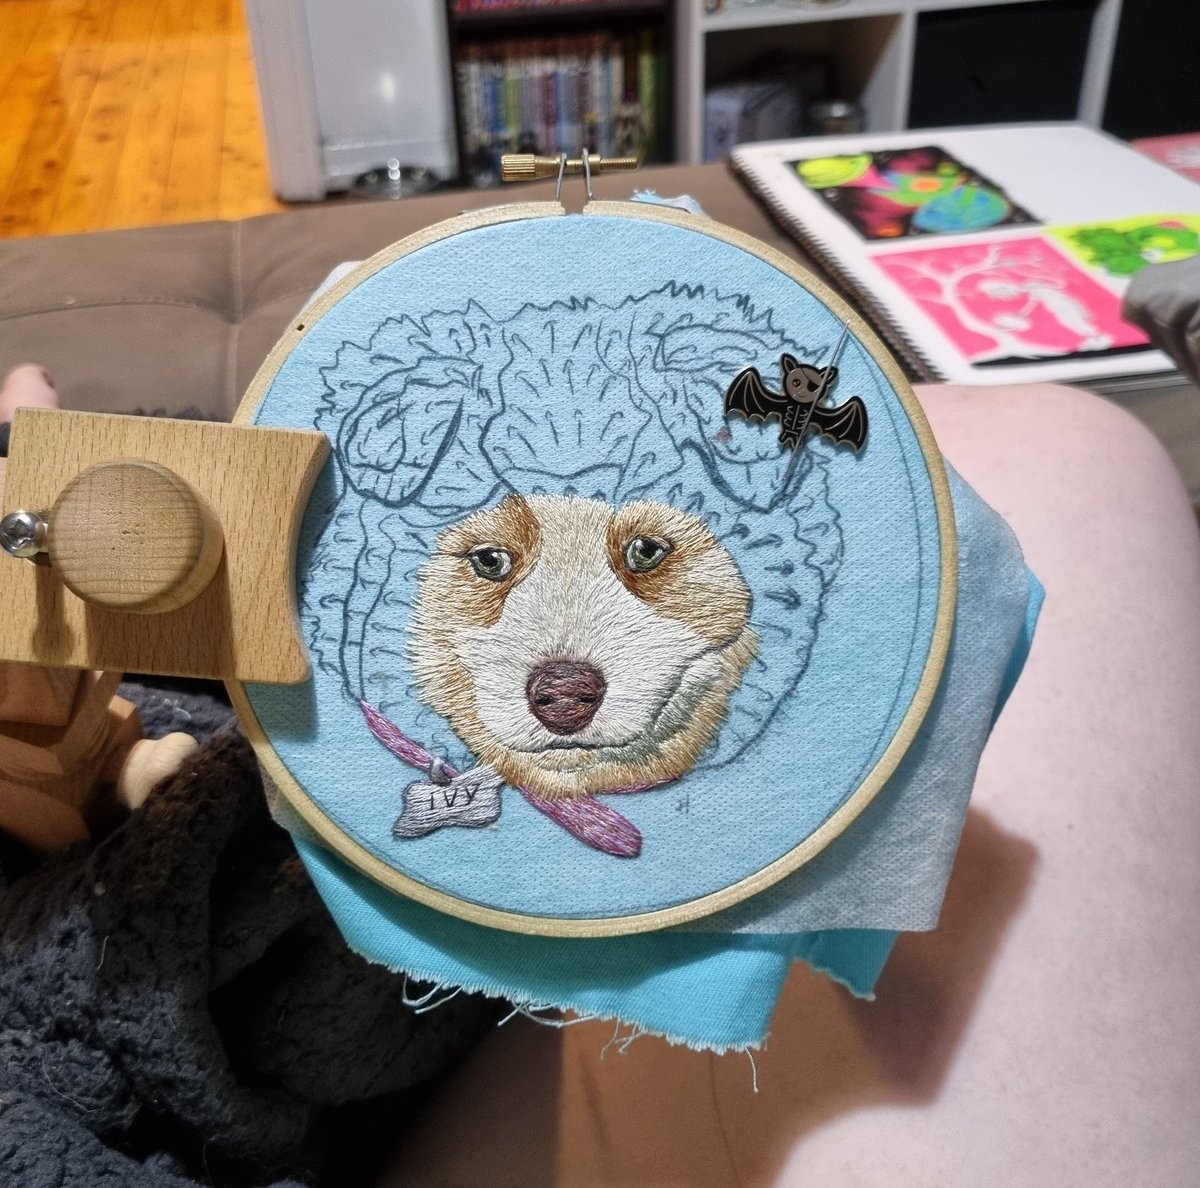 I've been working away at my first commission for the year! I am 36 hours in and there is still SO MUCH FLUFF to go!

#embroidery #petportraitembroidery #petportrait #threadpainting #dogembroidery #dogportrait #embroiderycommission #modernembroidery #modernthreadpainting